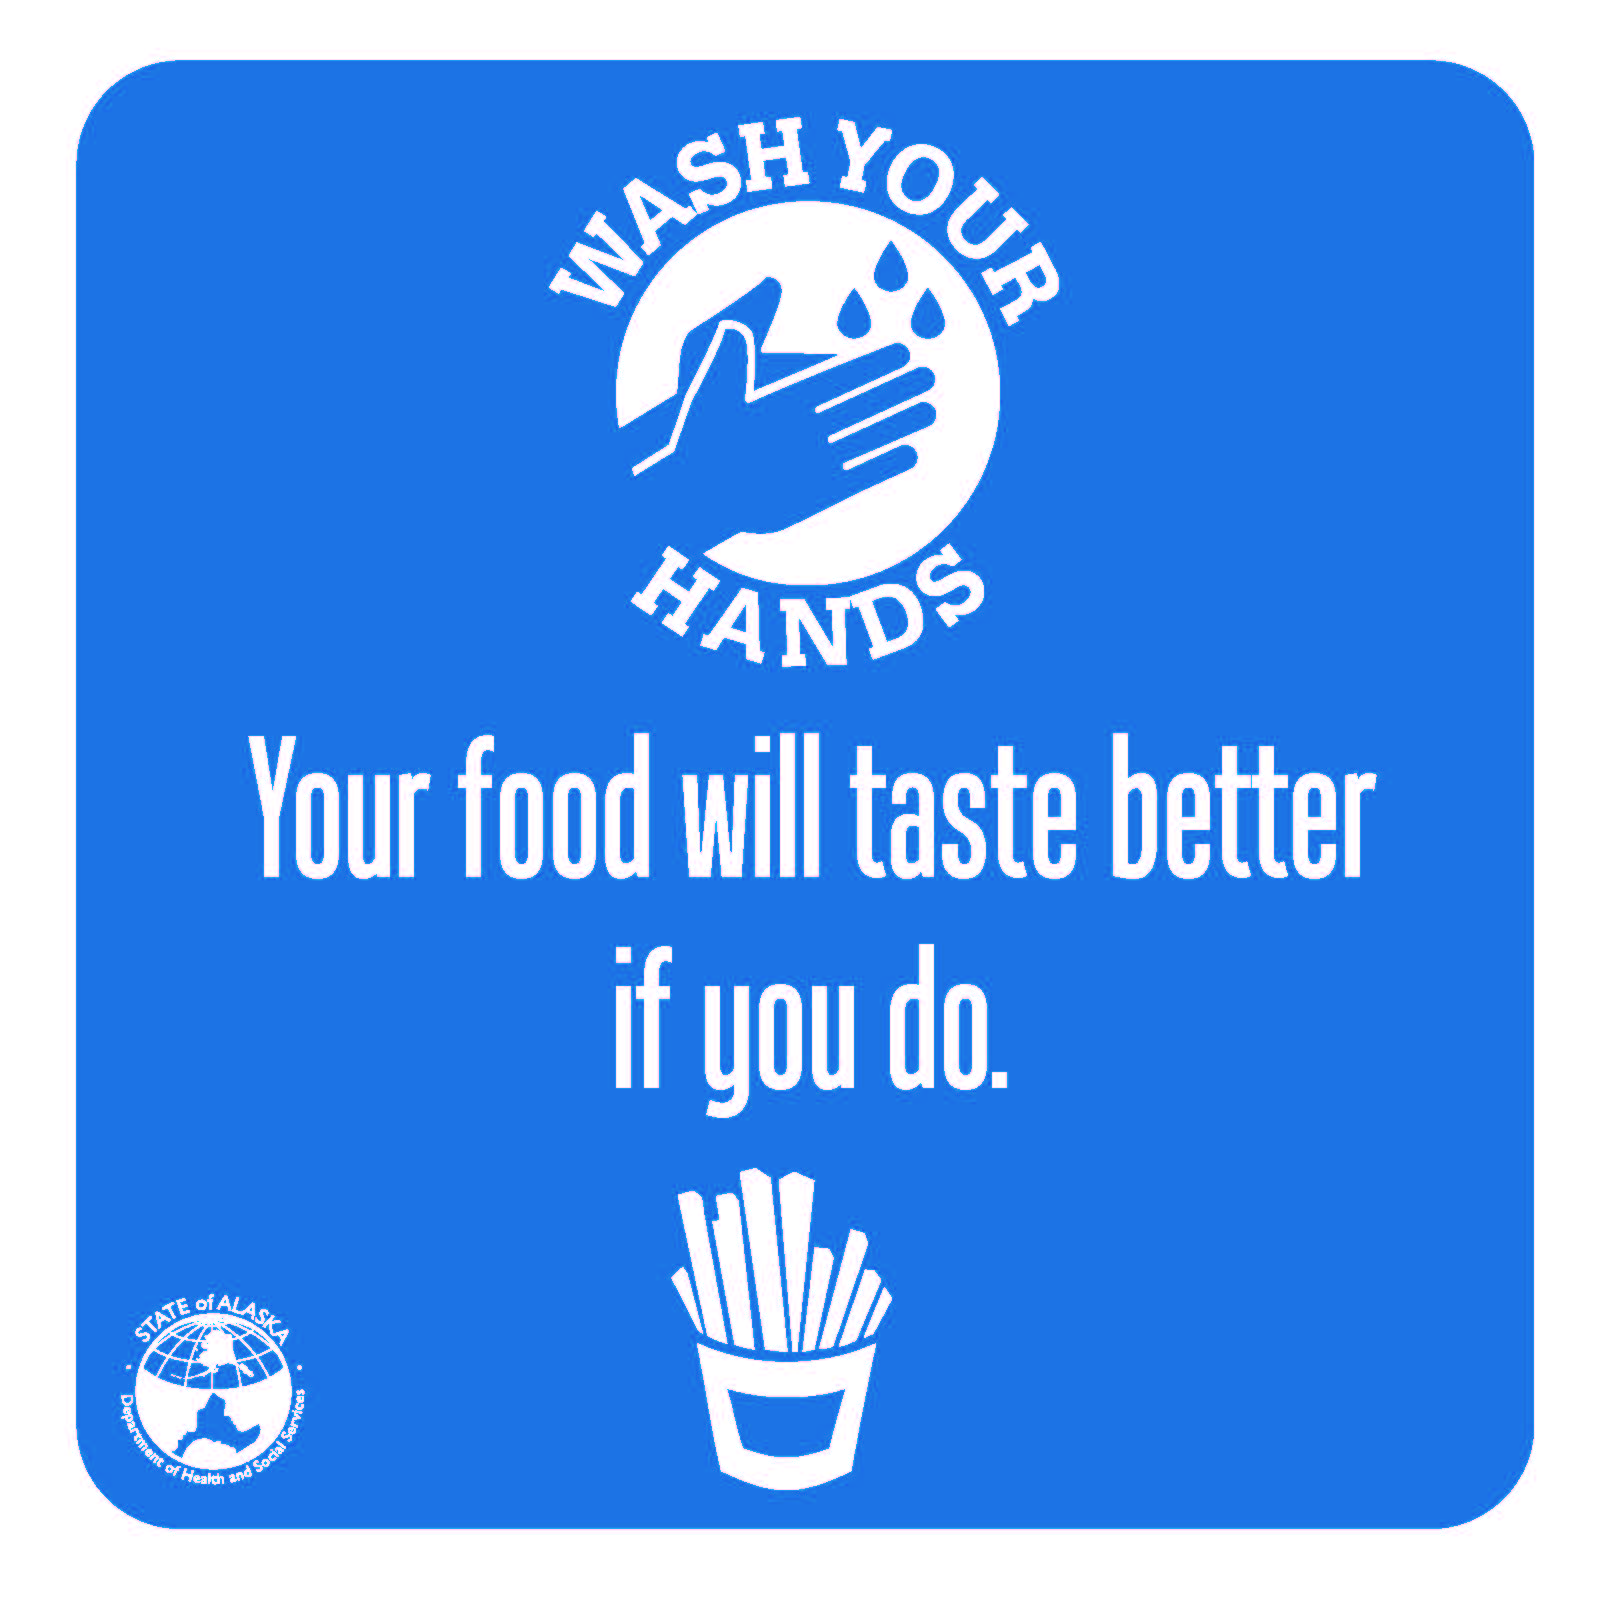 Wash your hands: Your food will taste better if you do.